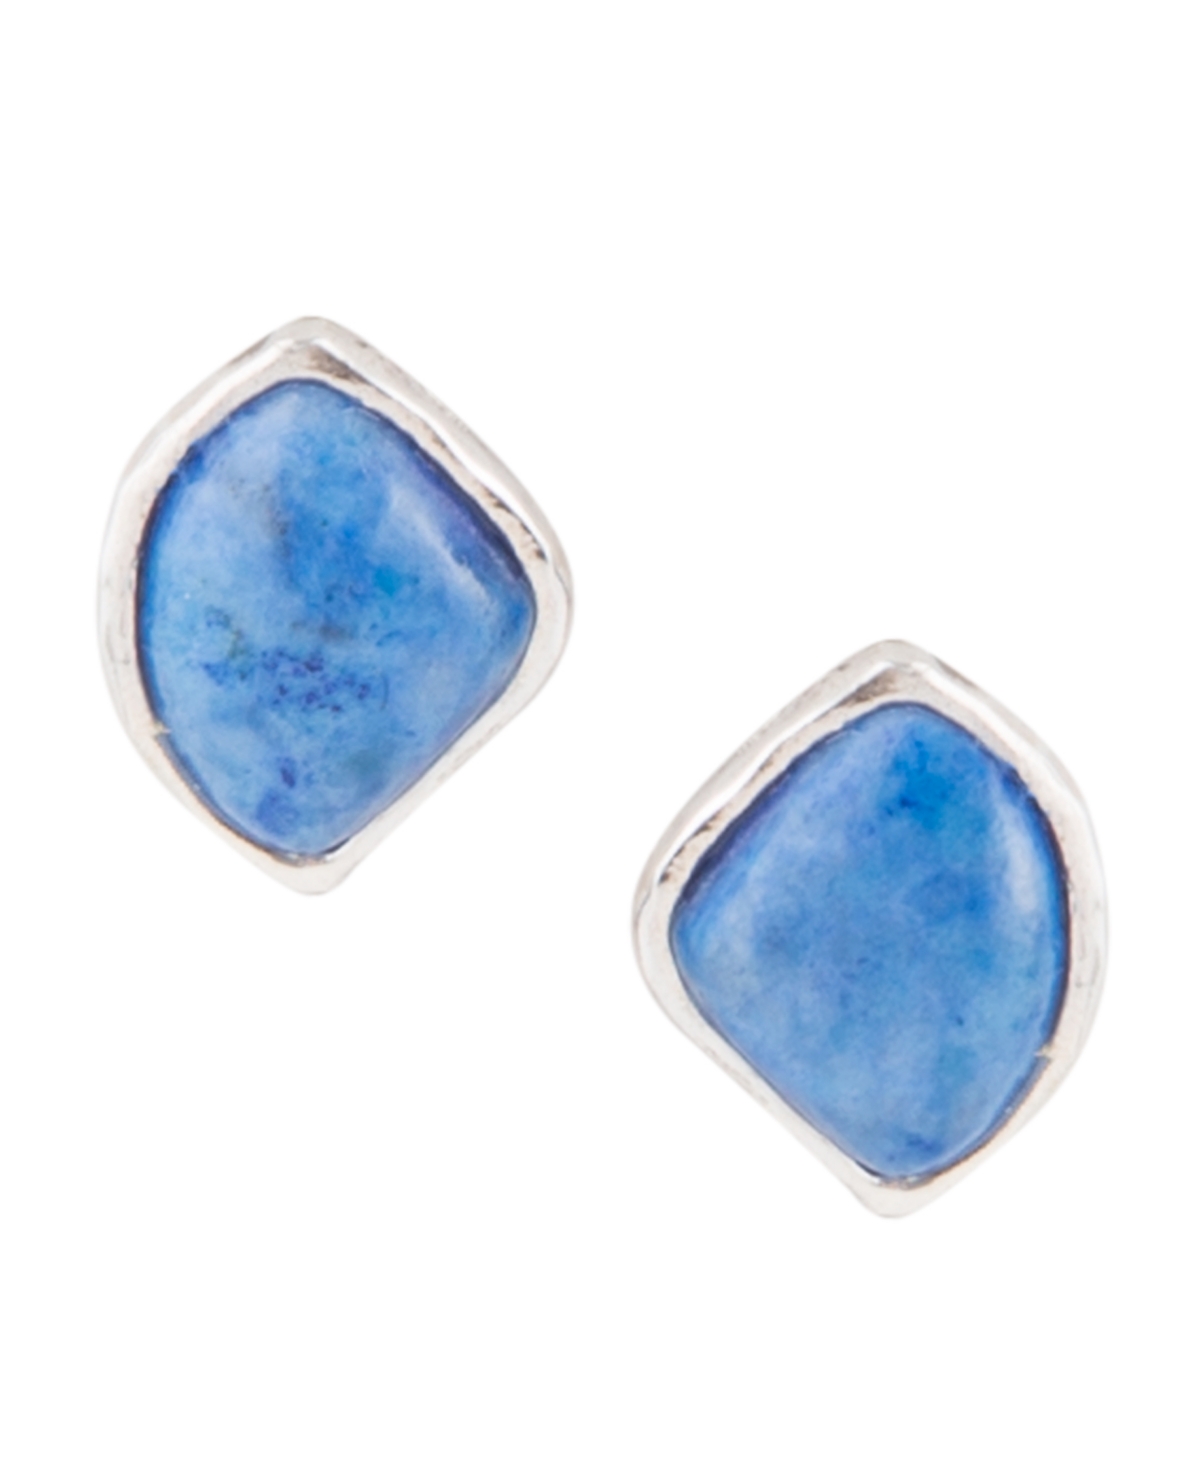 Barse Abstract Sterling Silver And Genuine Lapis Stud Earrings